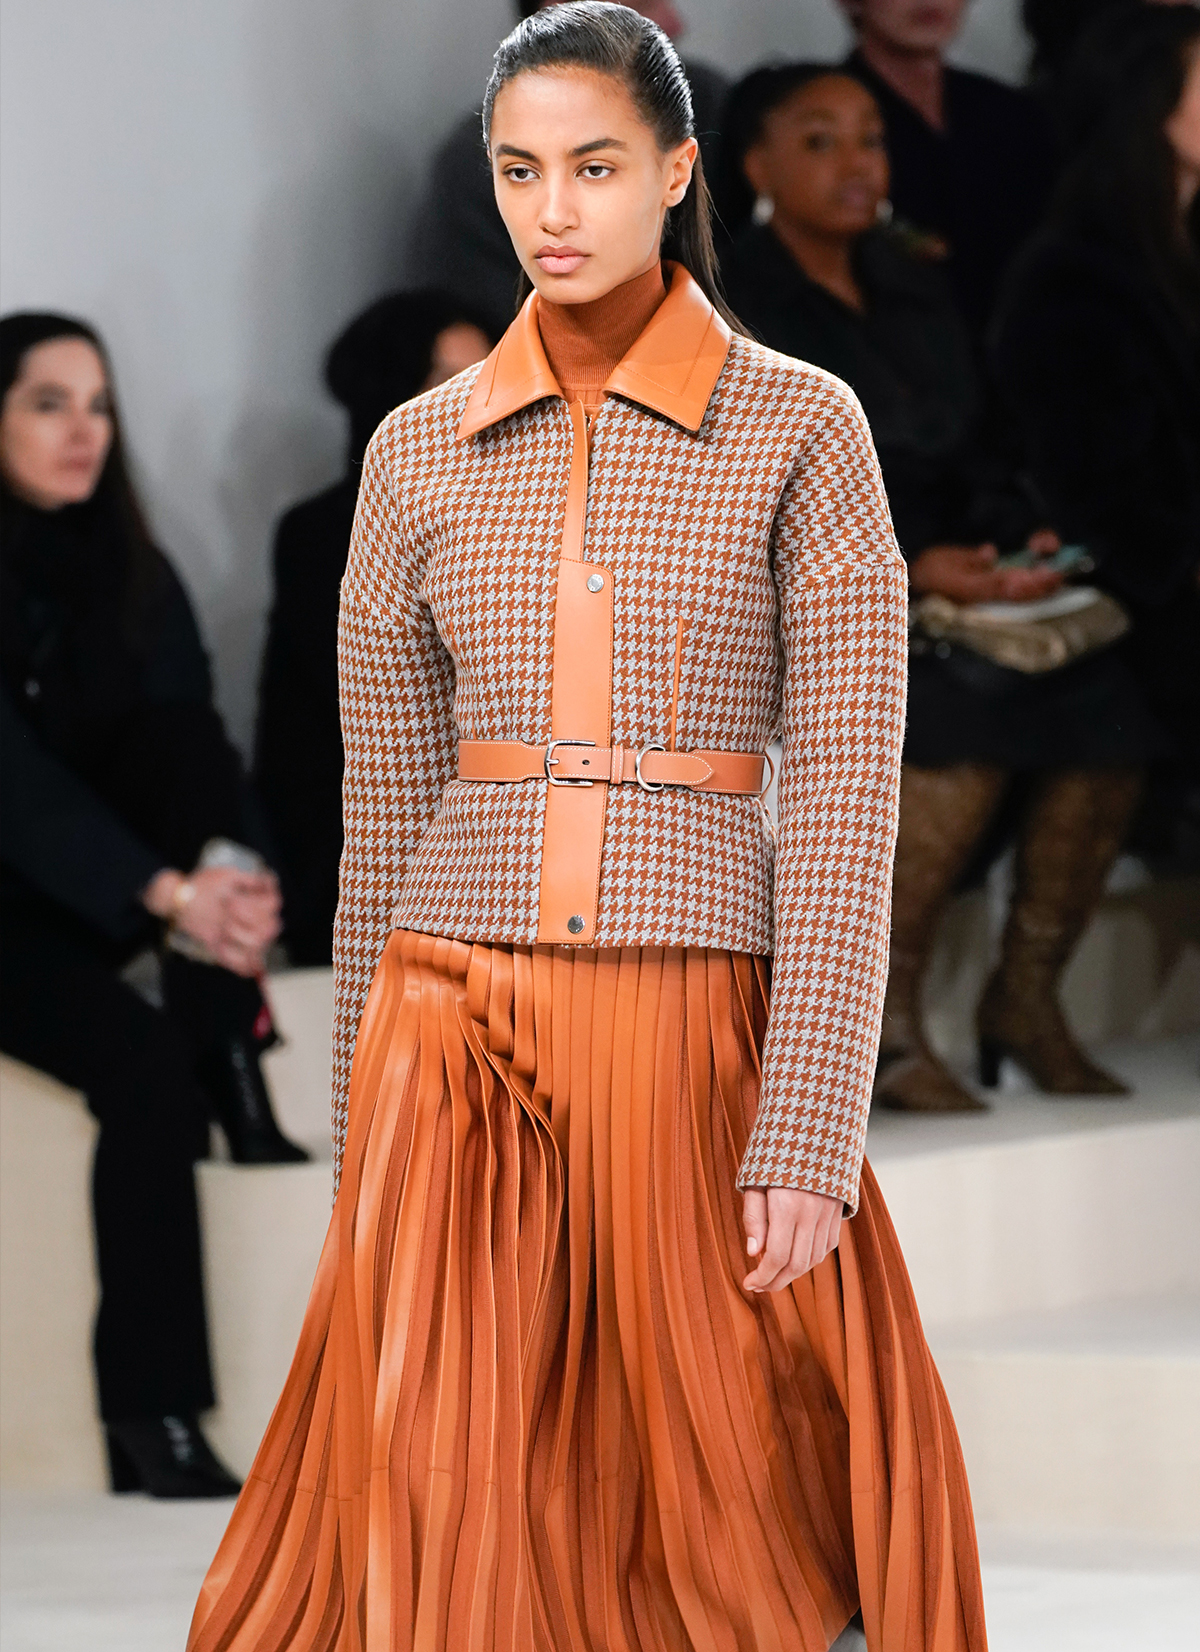 Autumn winter 2020 fashion trends: Jacket and skirt